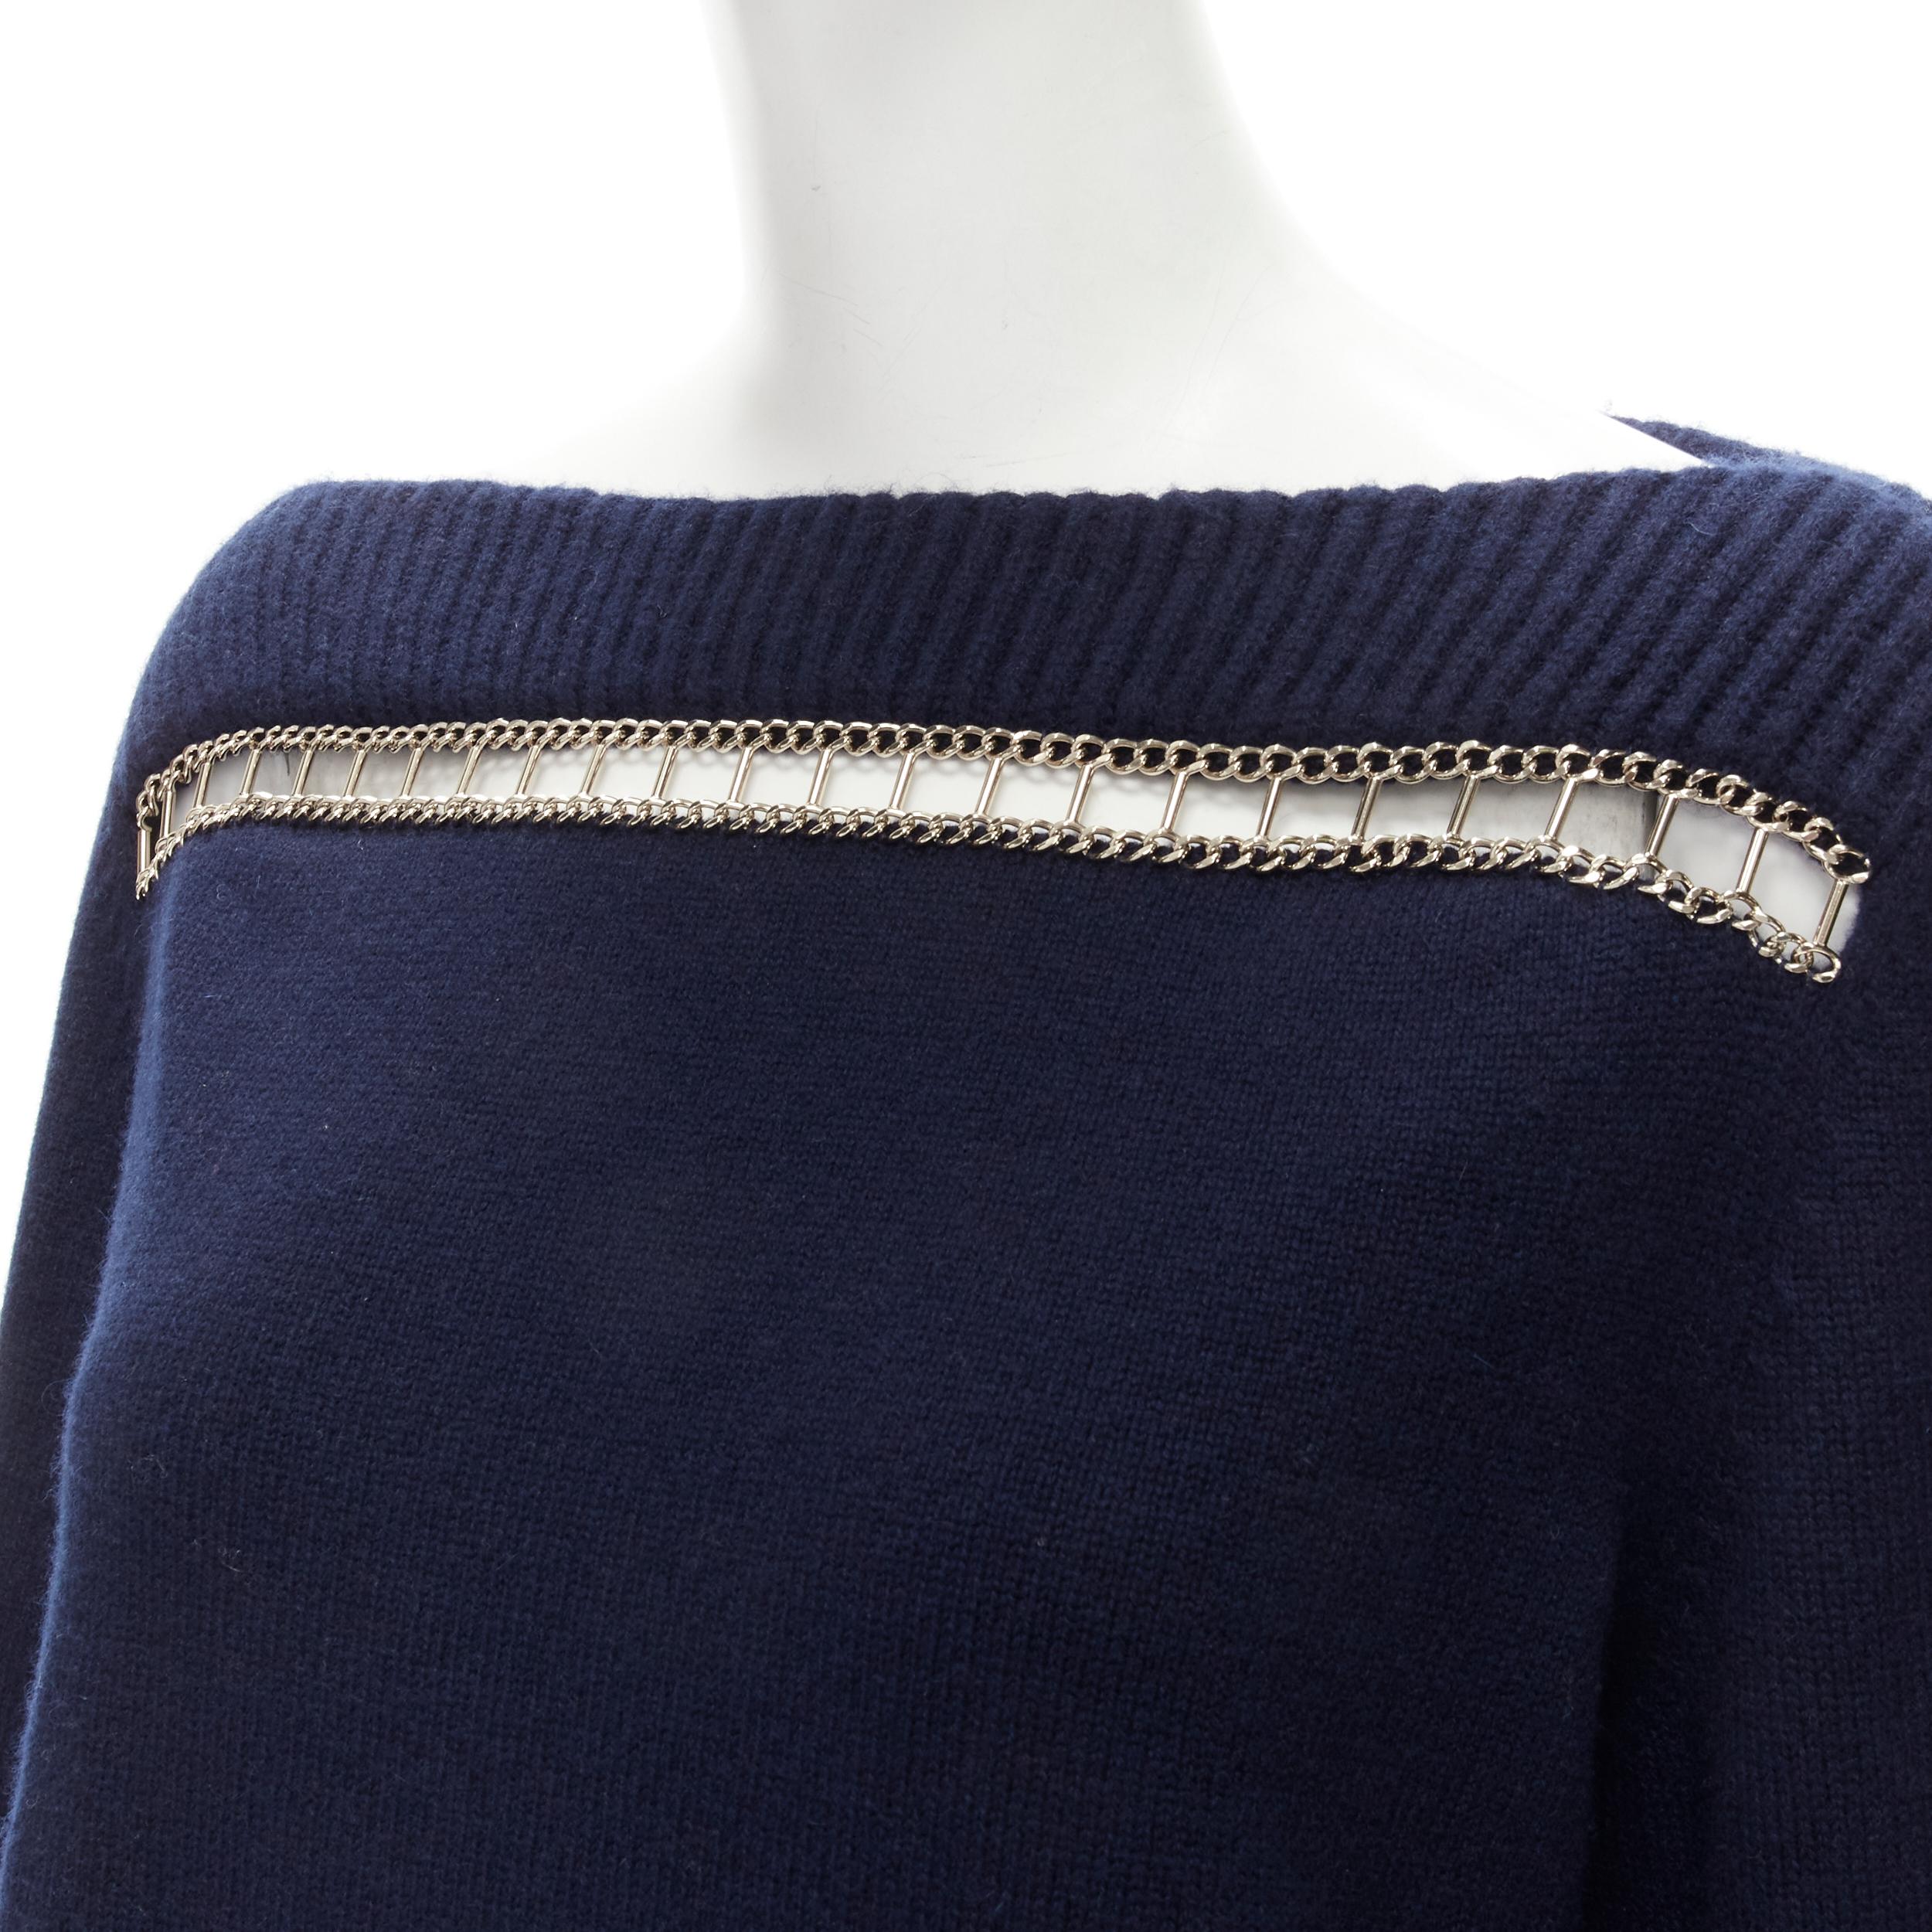 CHANEL 2020 Runway 100% cashmere navy gold chain trim boat neck sweater FR38 For Sale 2